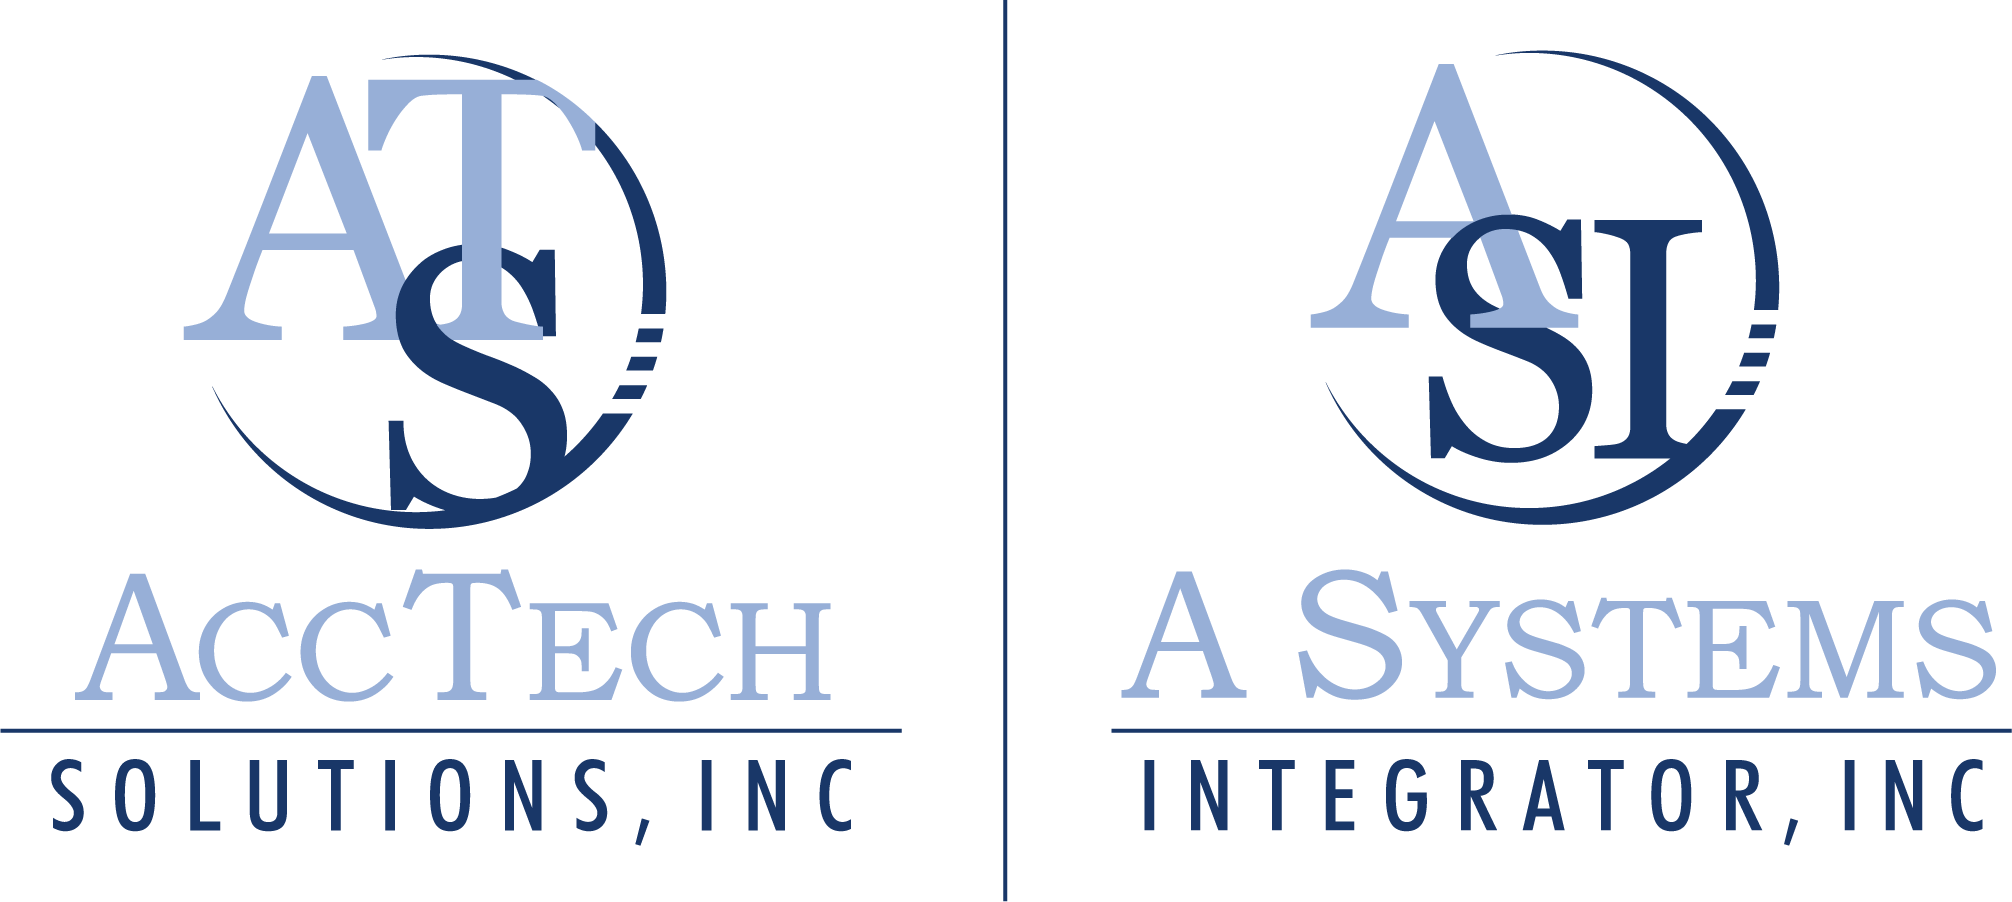 A Systems Integrator